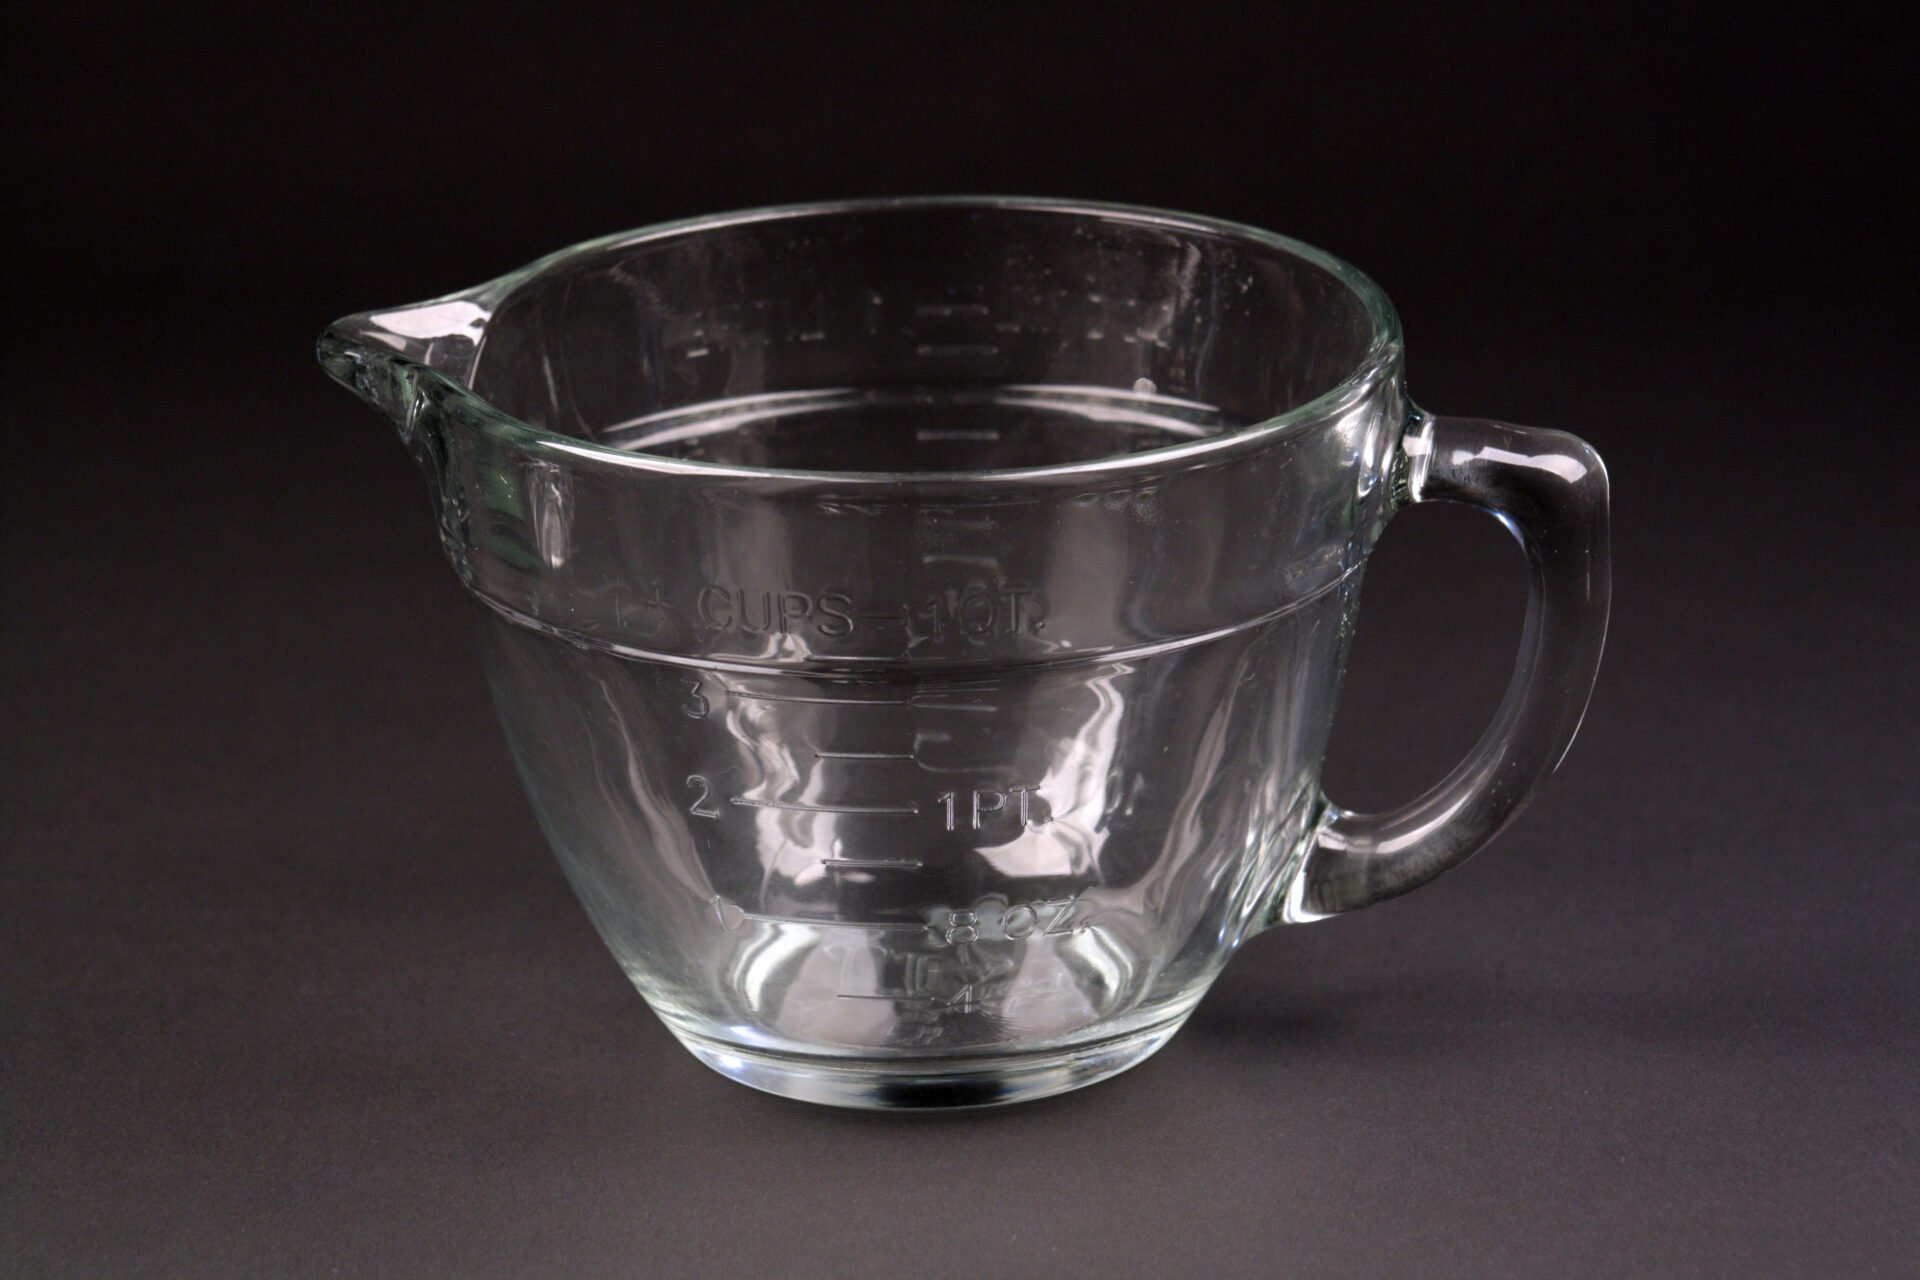 Glass measuring cups tested for lead on dark background